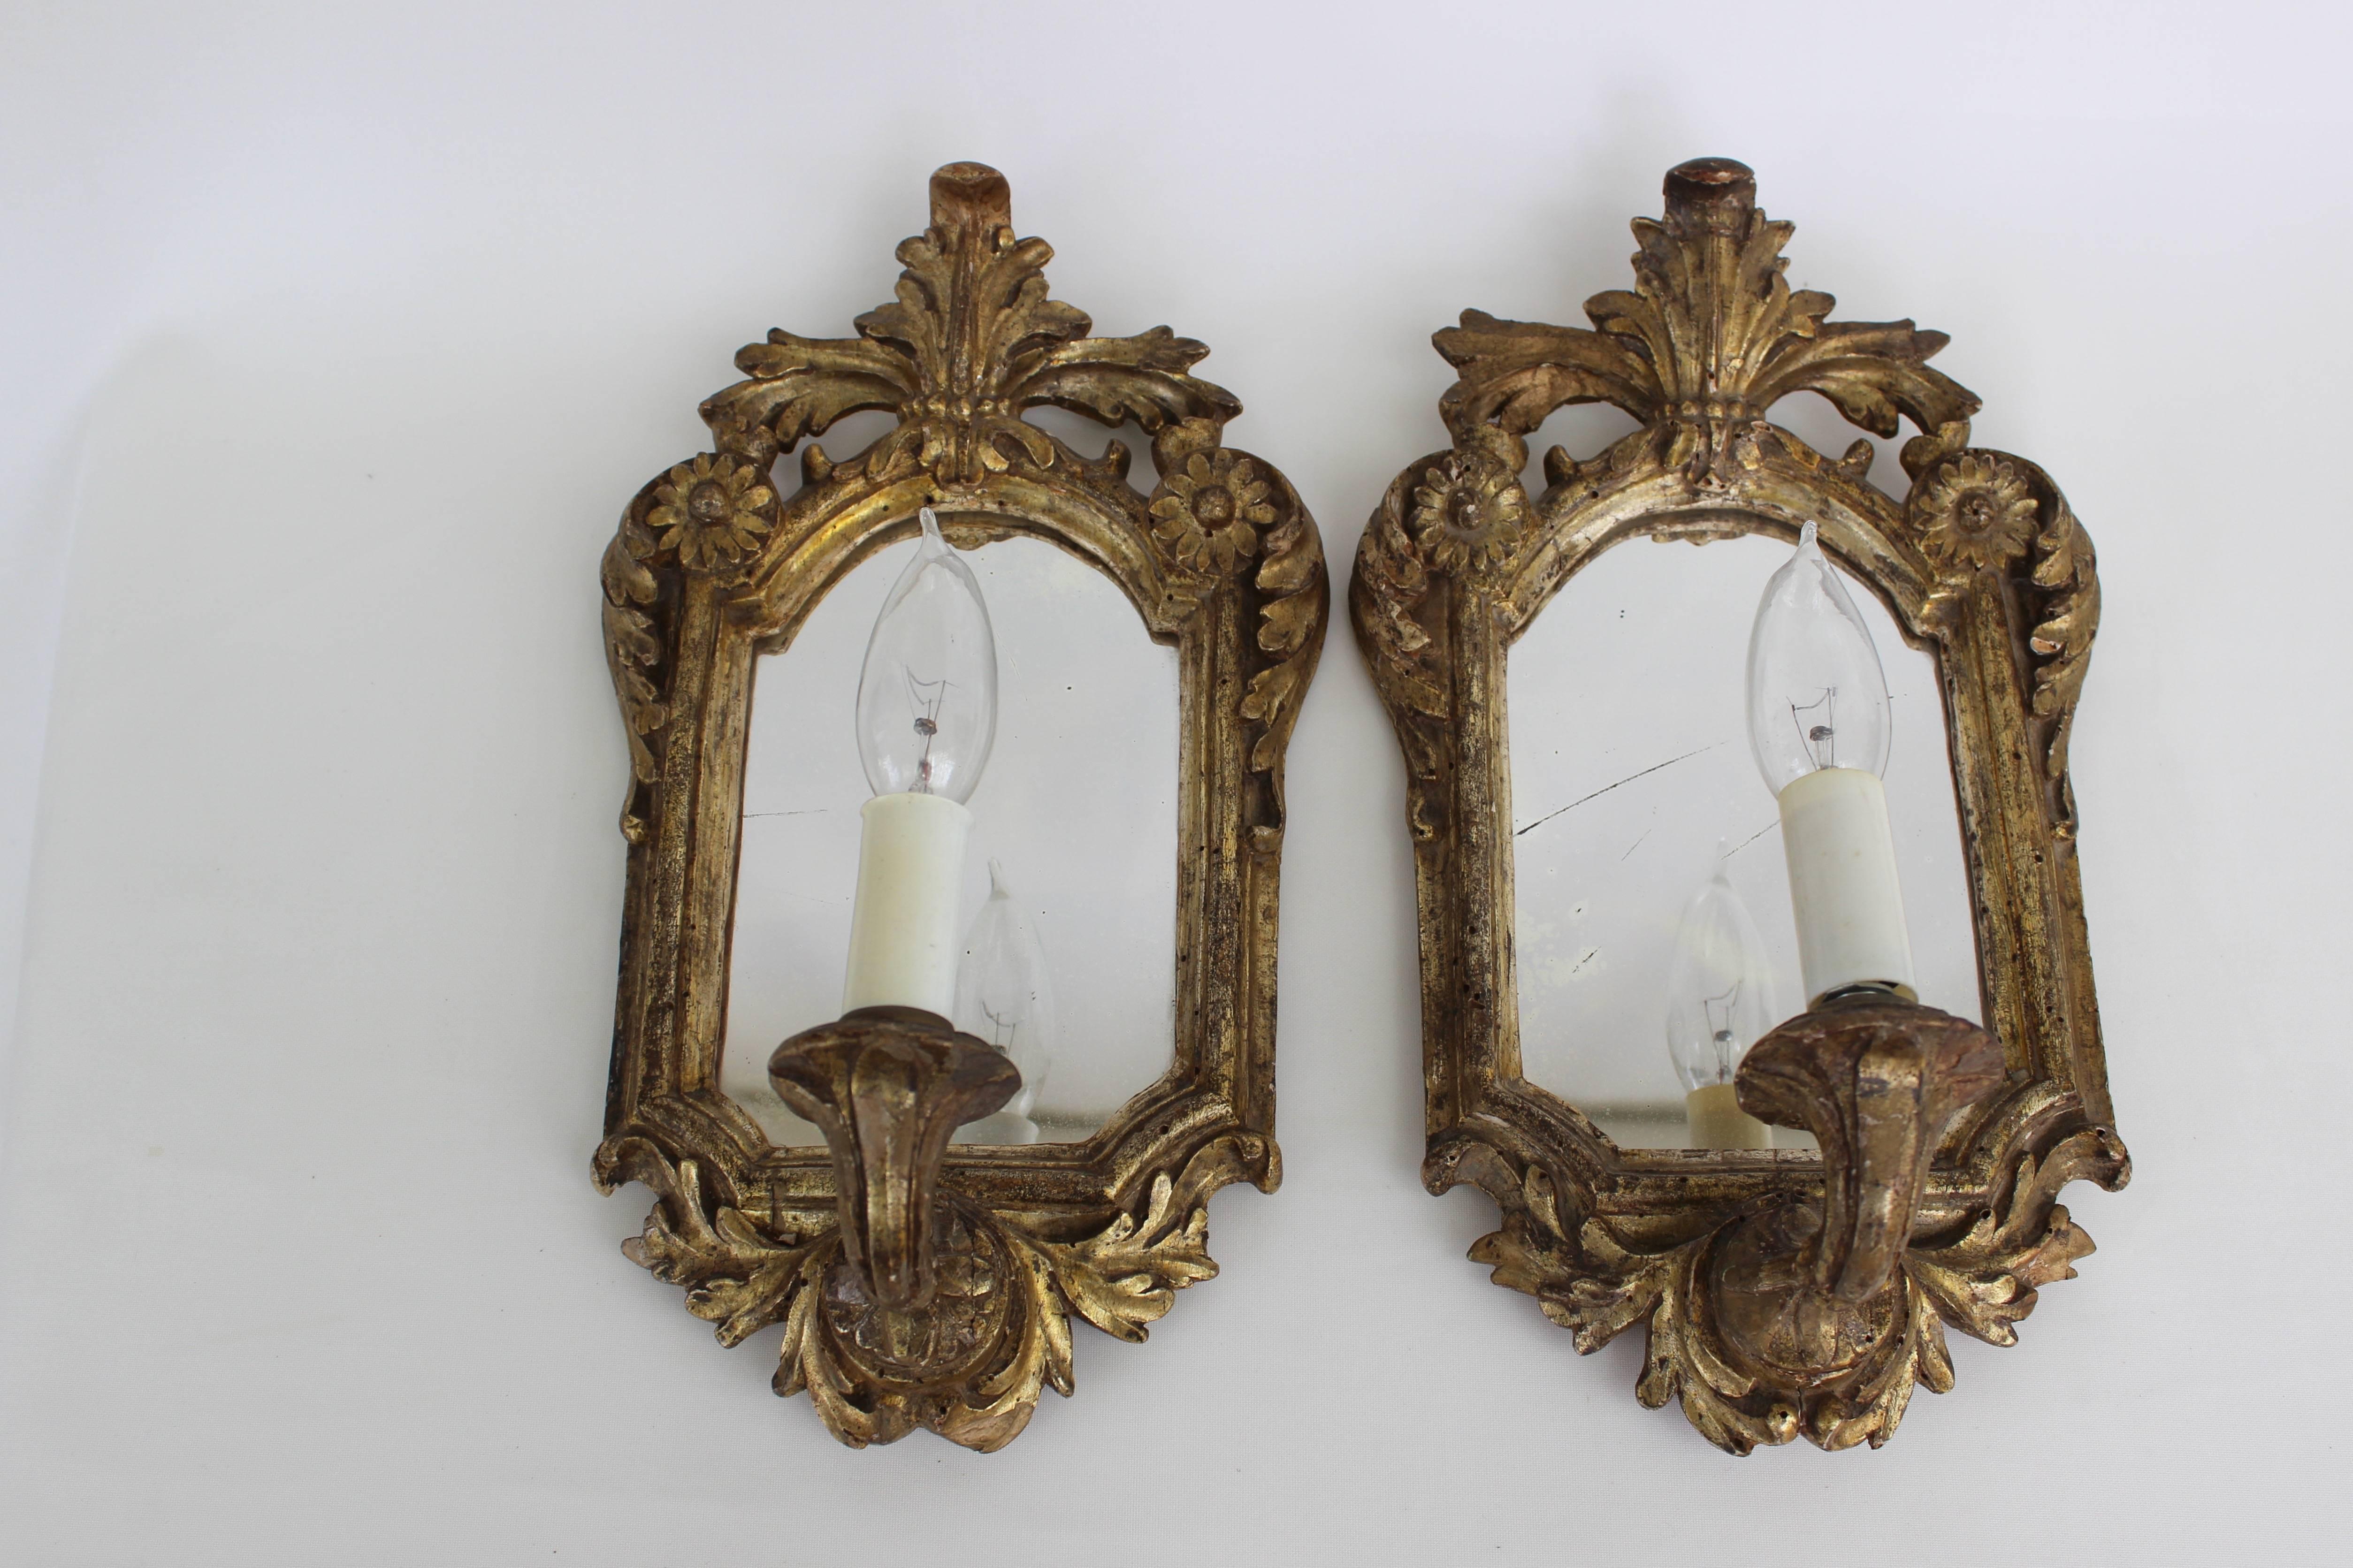 Pair of antique mirrored and electrified gilded wood sconces.